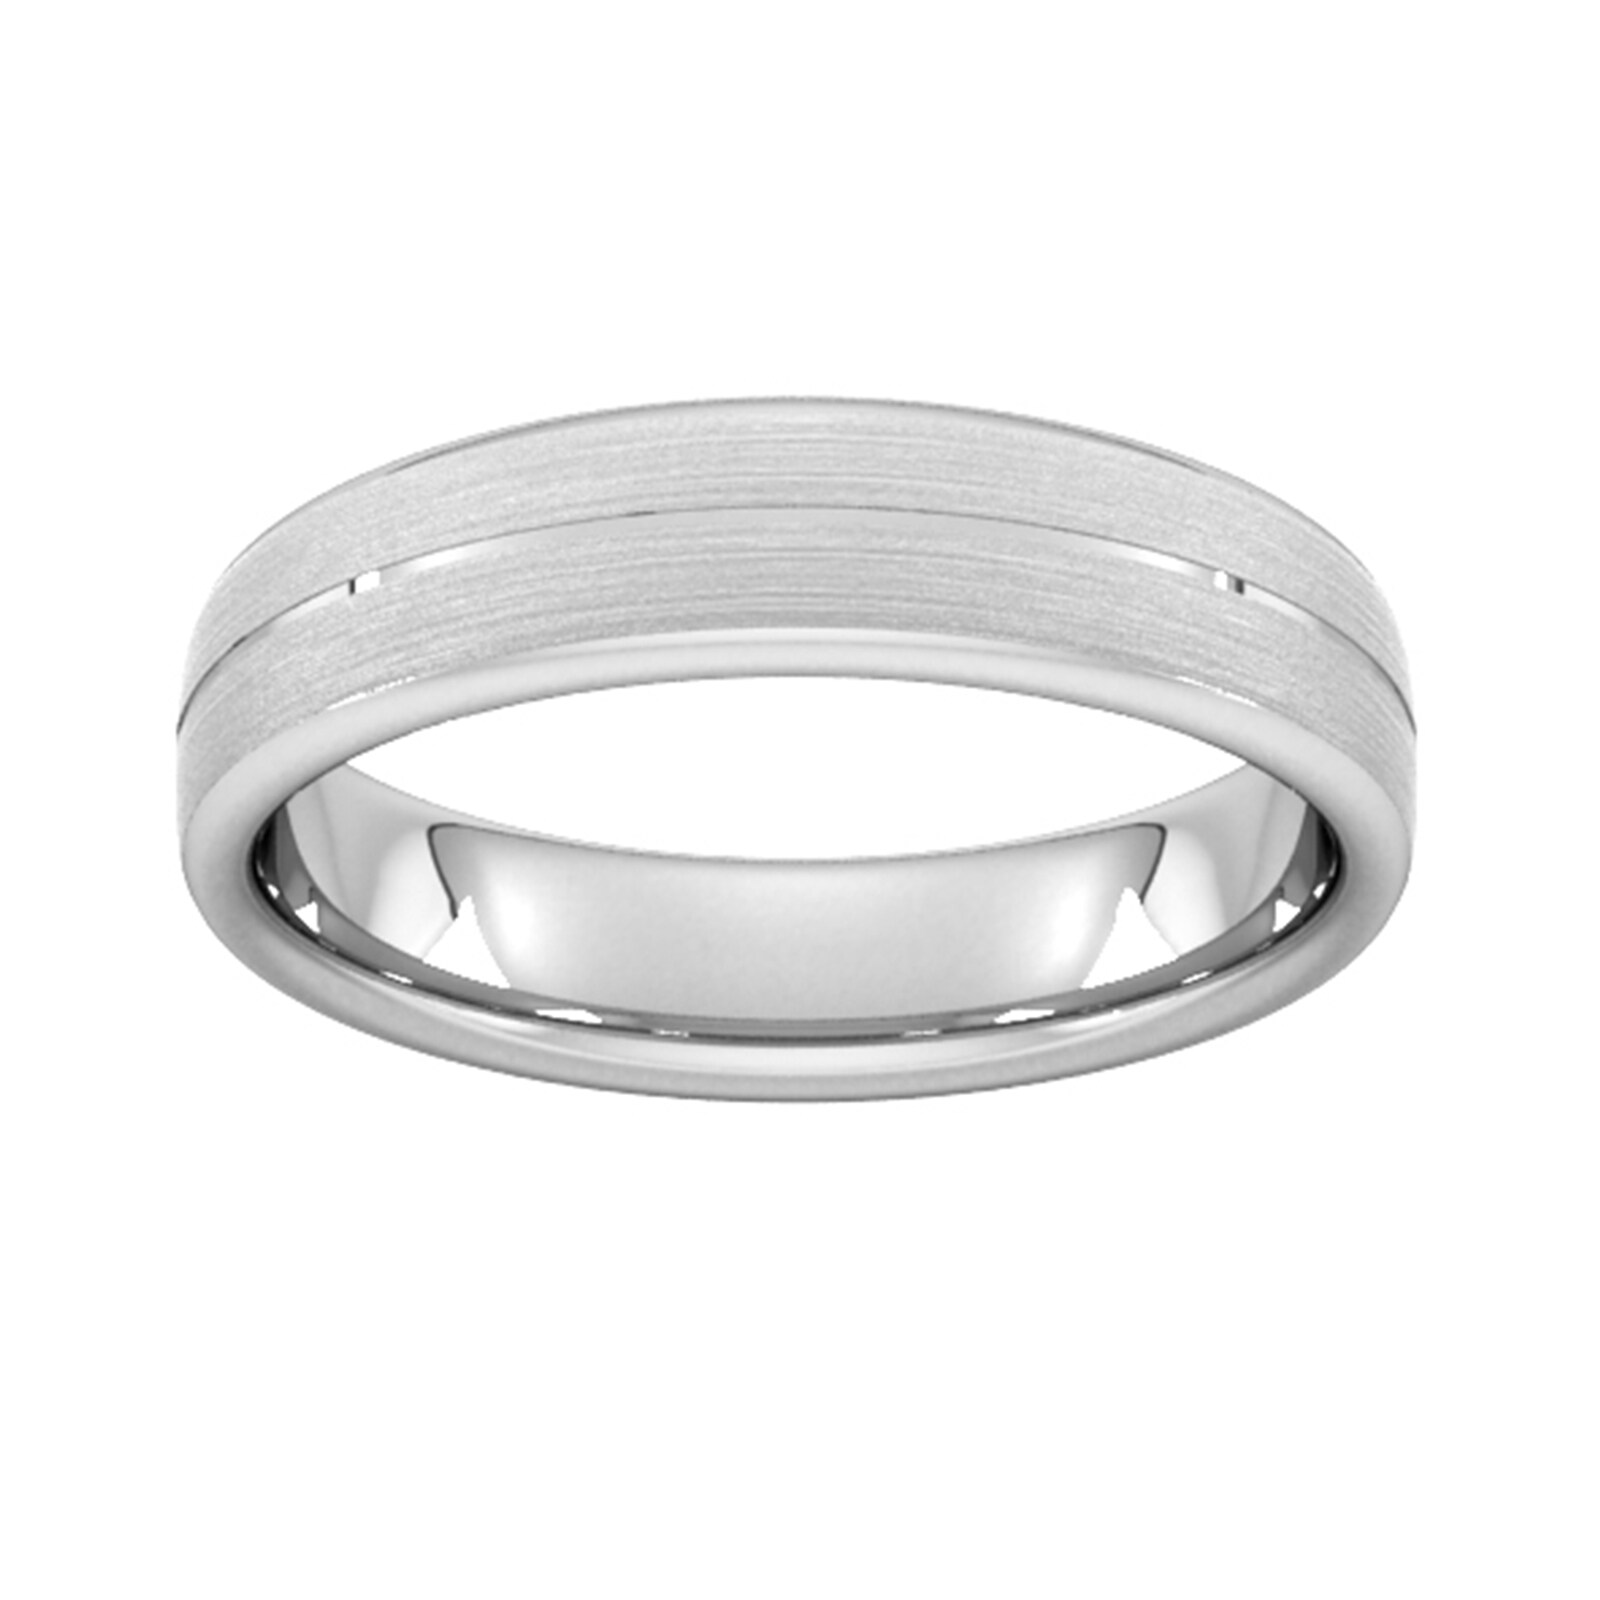 5mm Slight Court Heavy Centre Groove With Chamfered Edge Wedding Ring In Platinum - Ring Size Q